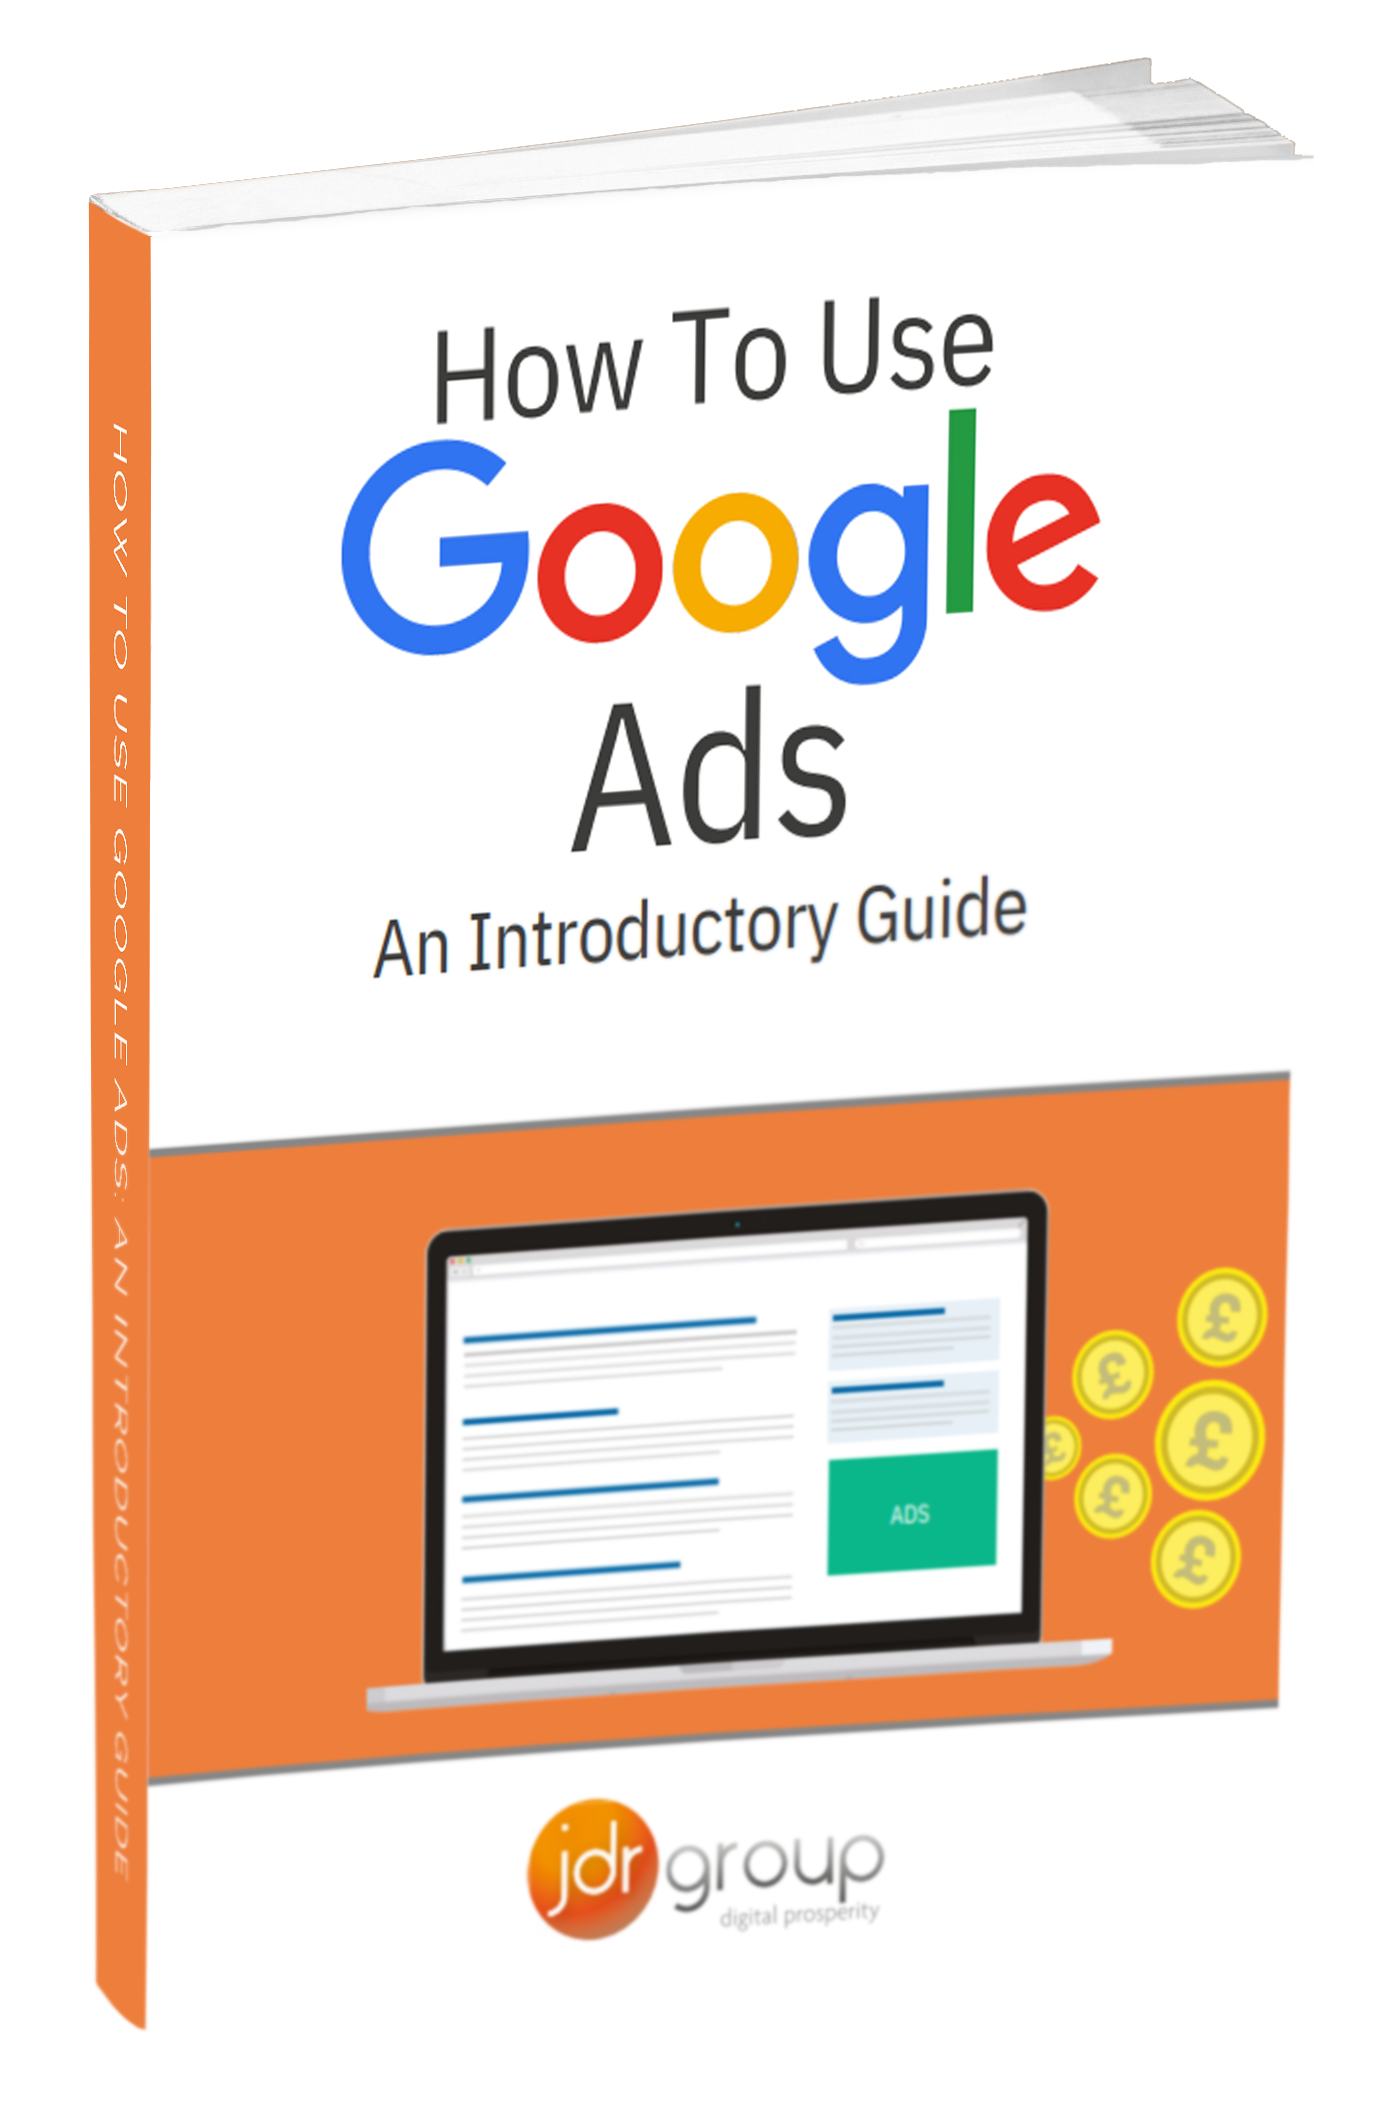 JDR-How-To-Use-Google-Ads-New